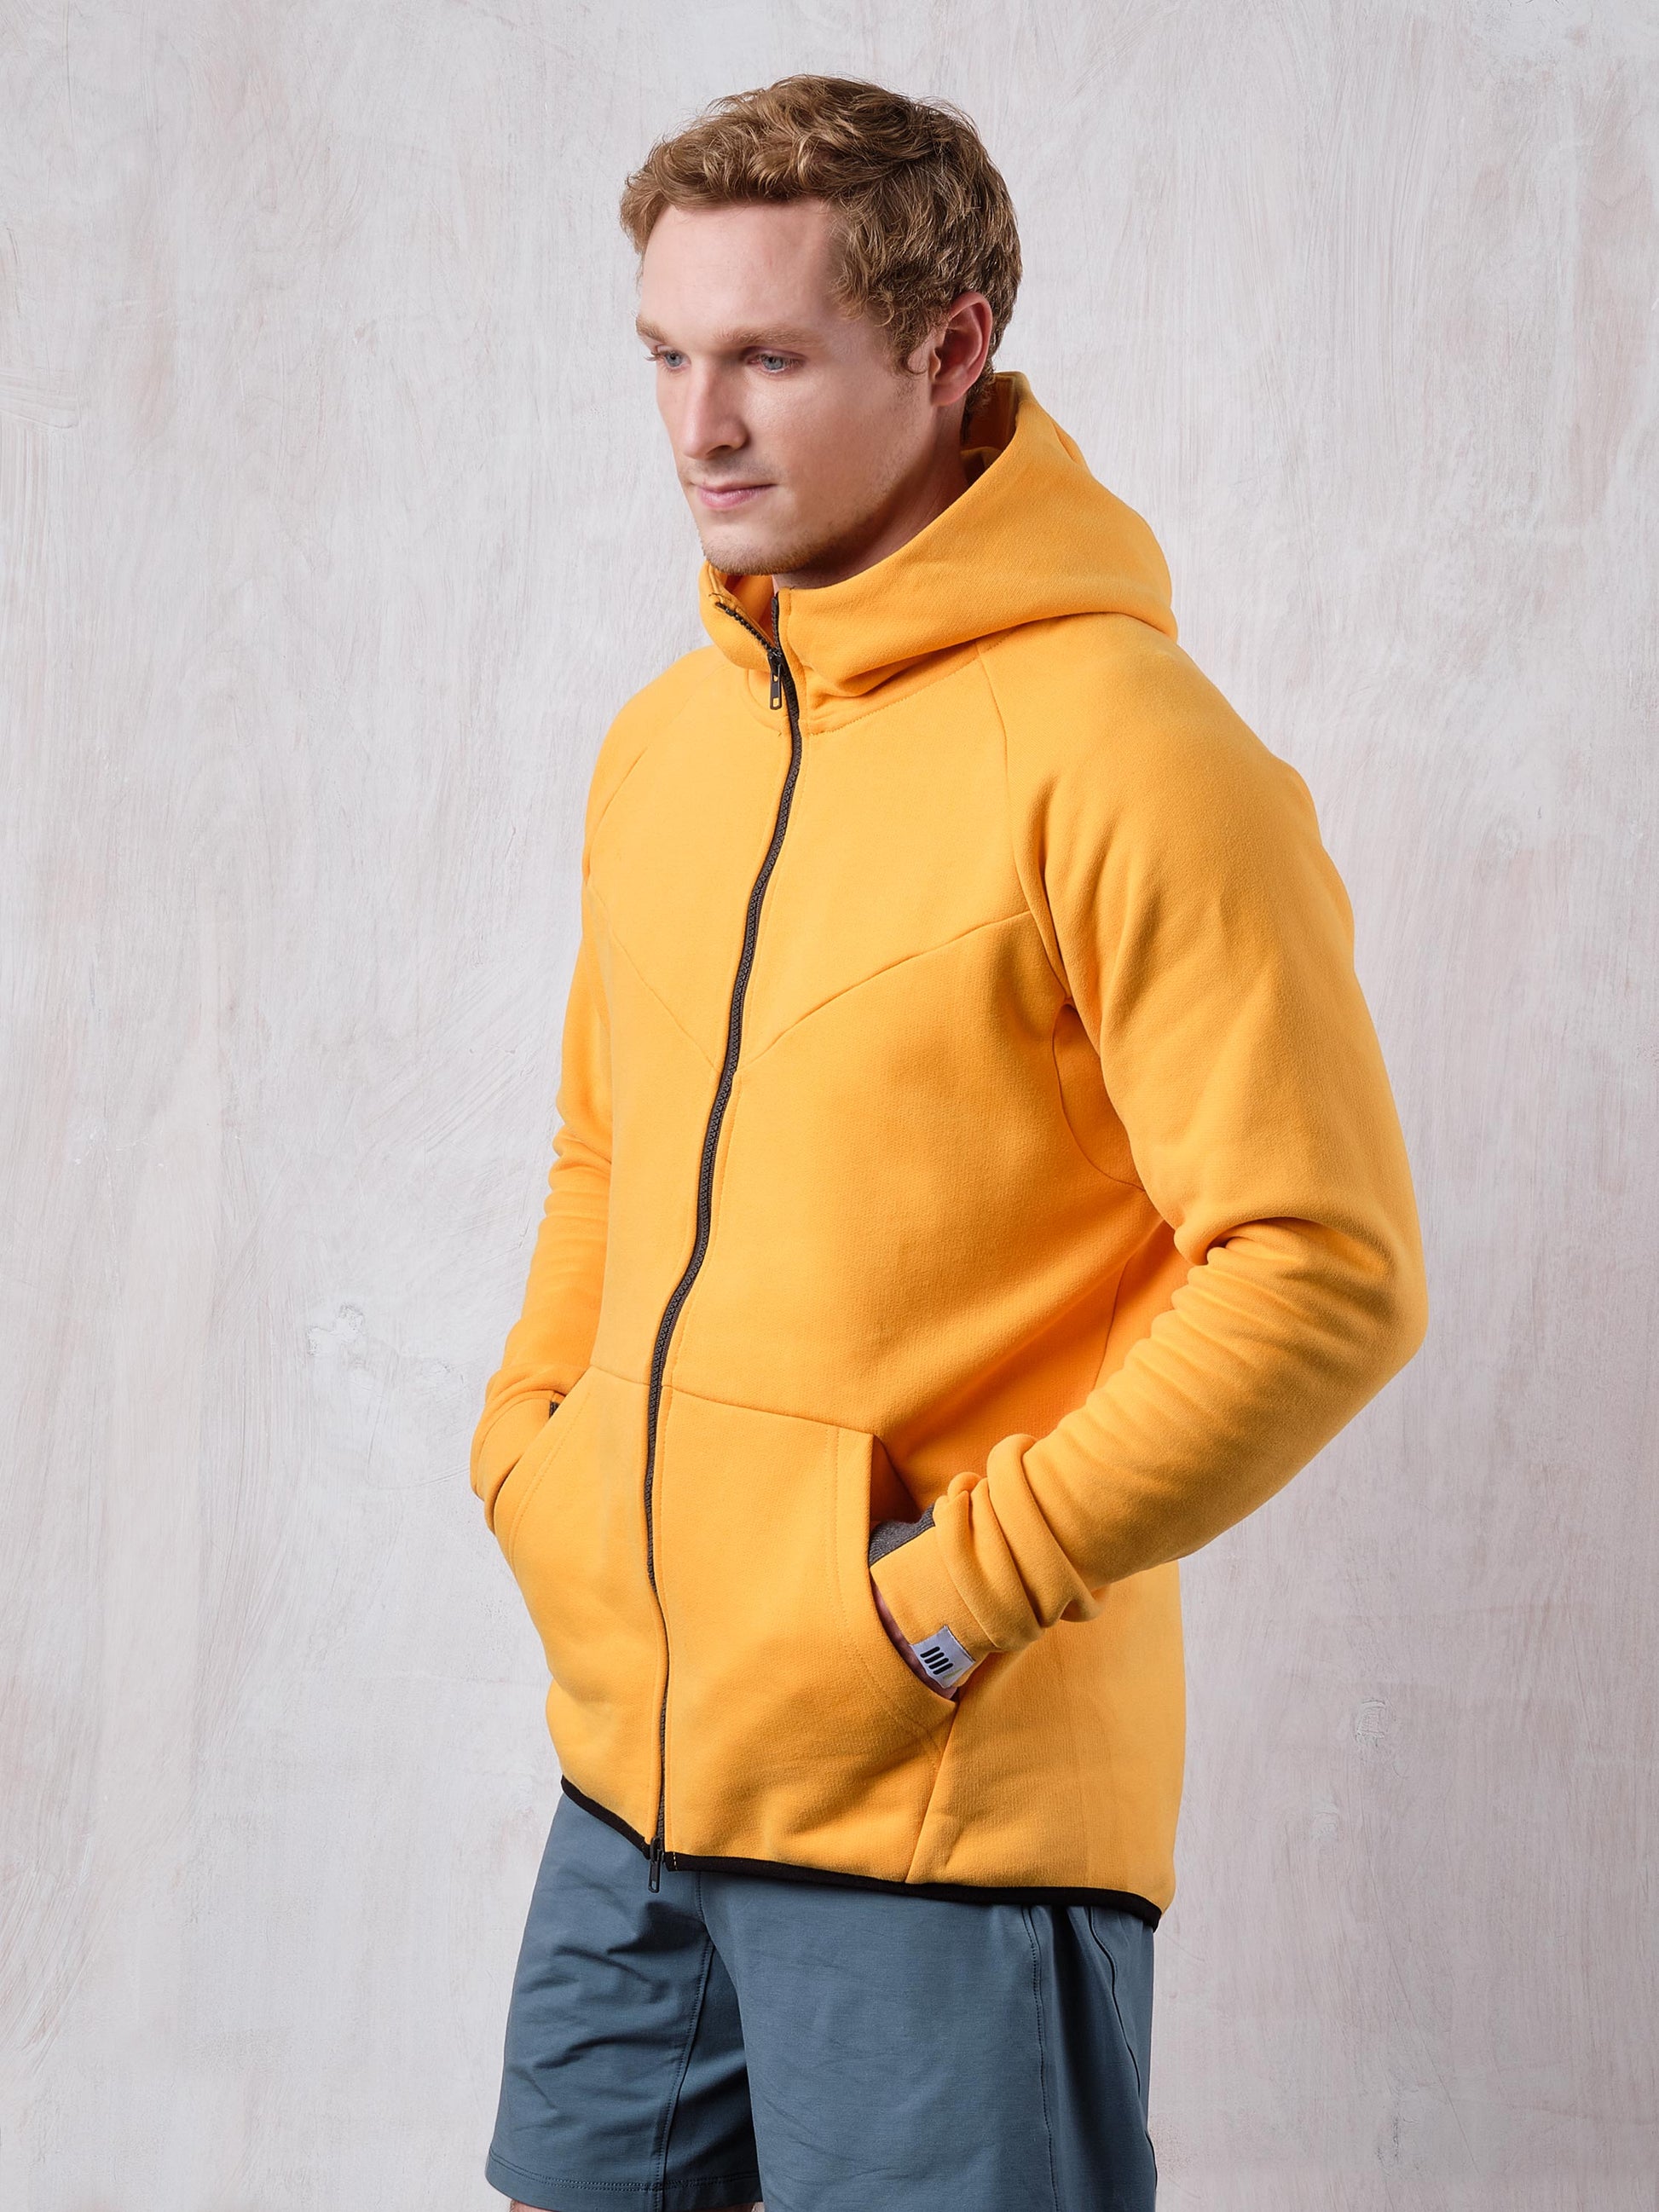 All Cotton Double-zipped Hoodie - side- hood off